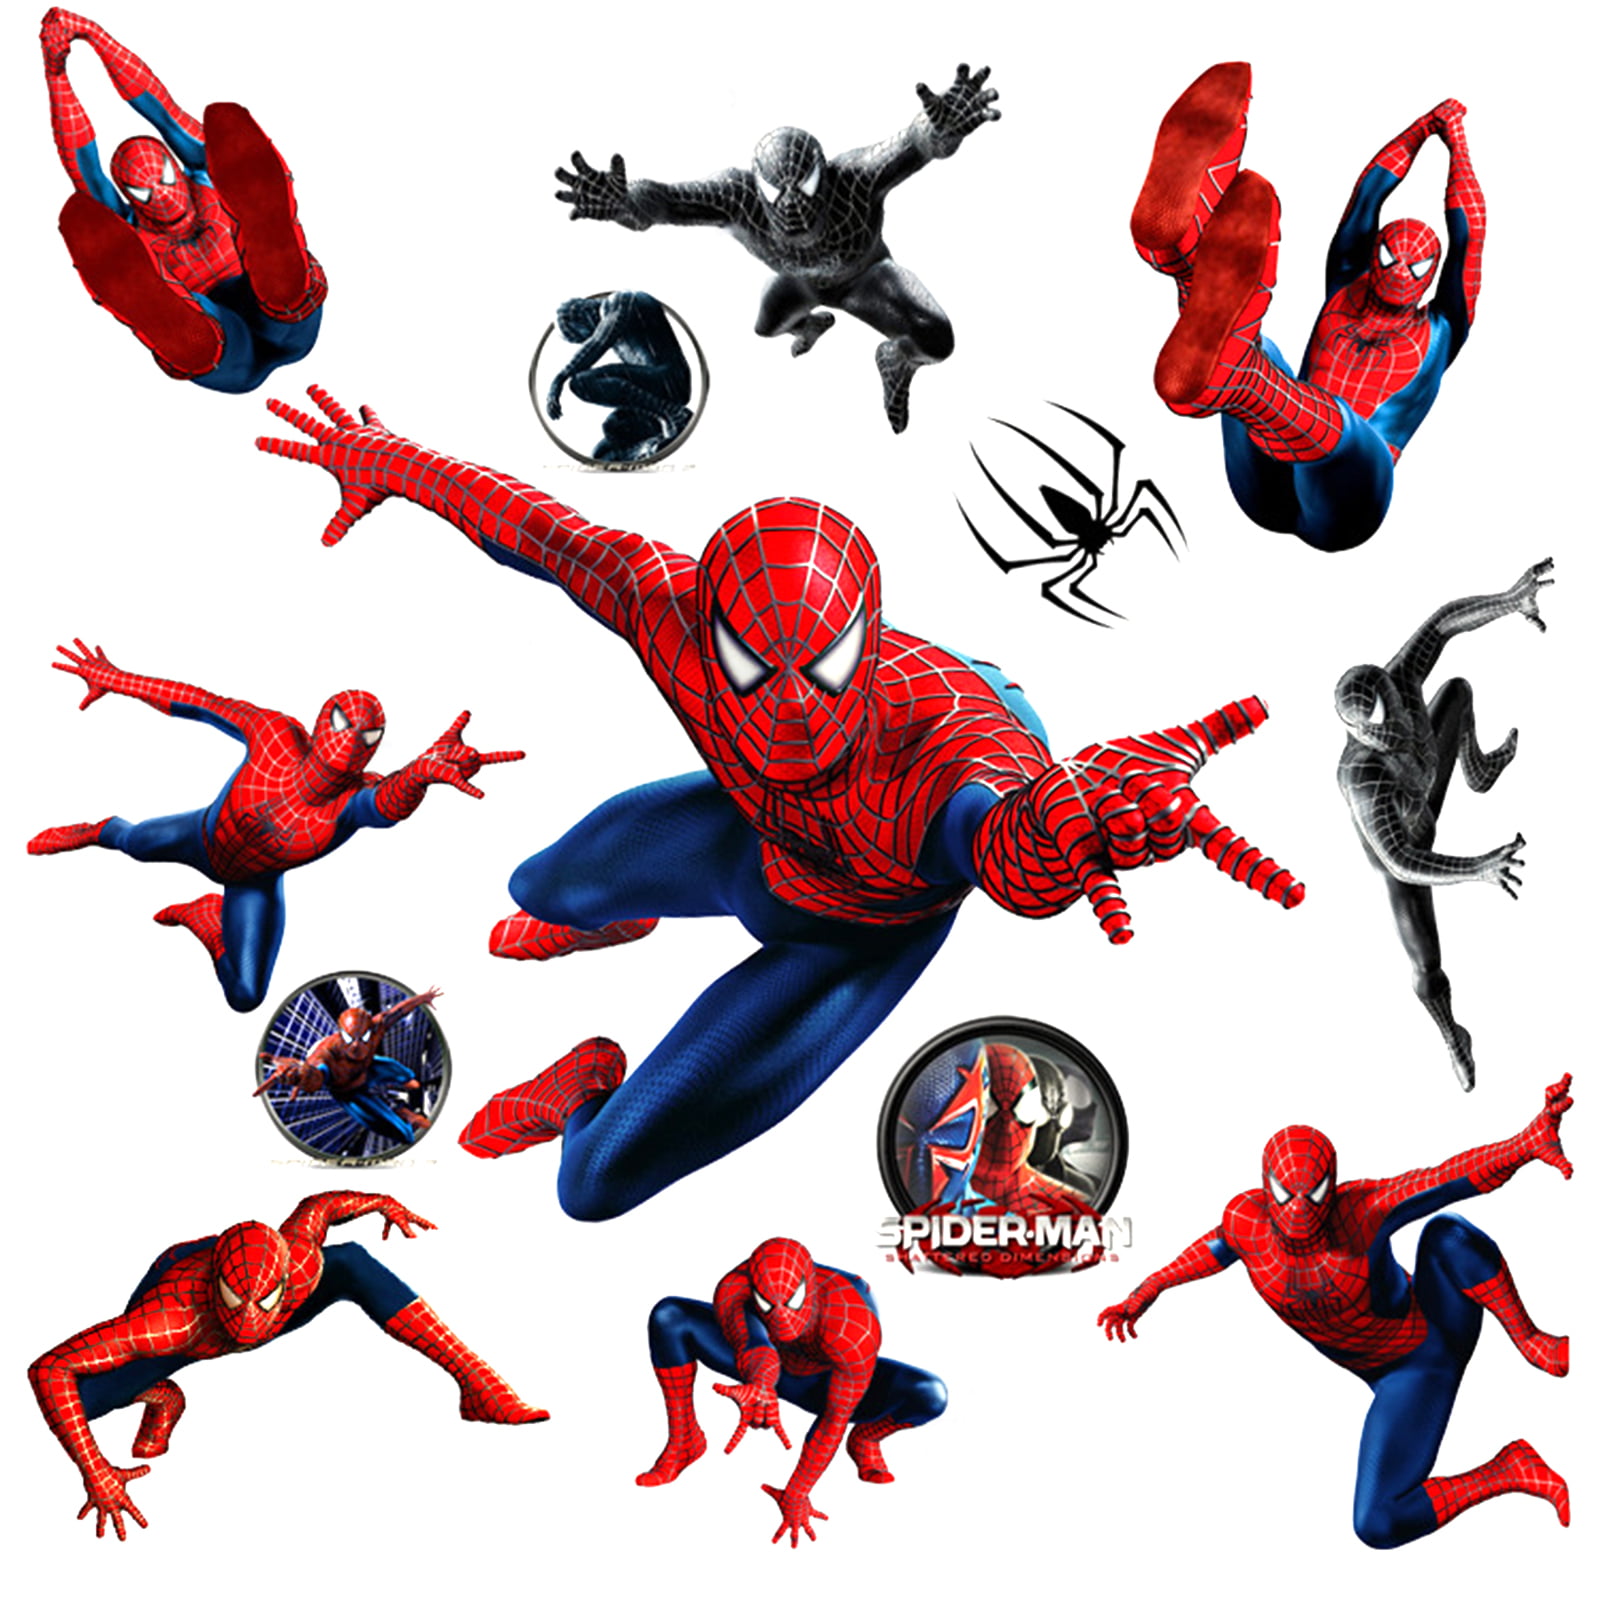 AMAZING SPIDERMAN ~REMOVABLE WALL STICKERS DECALS~ 